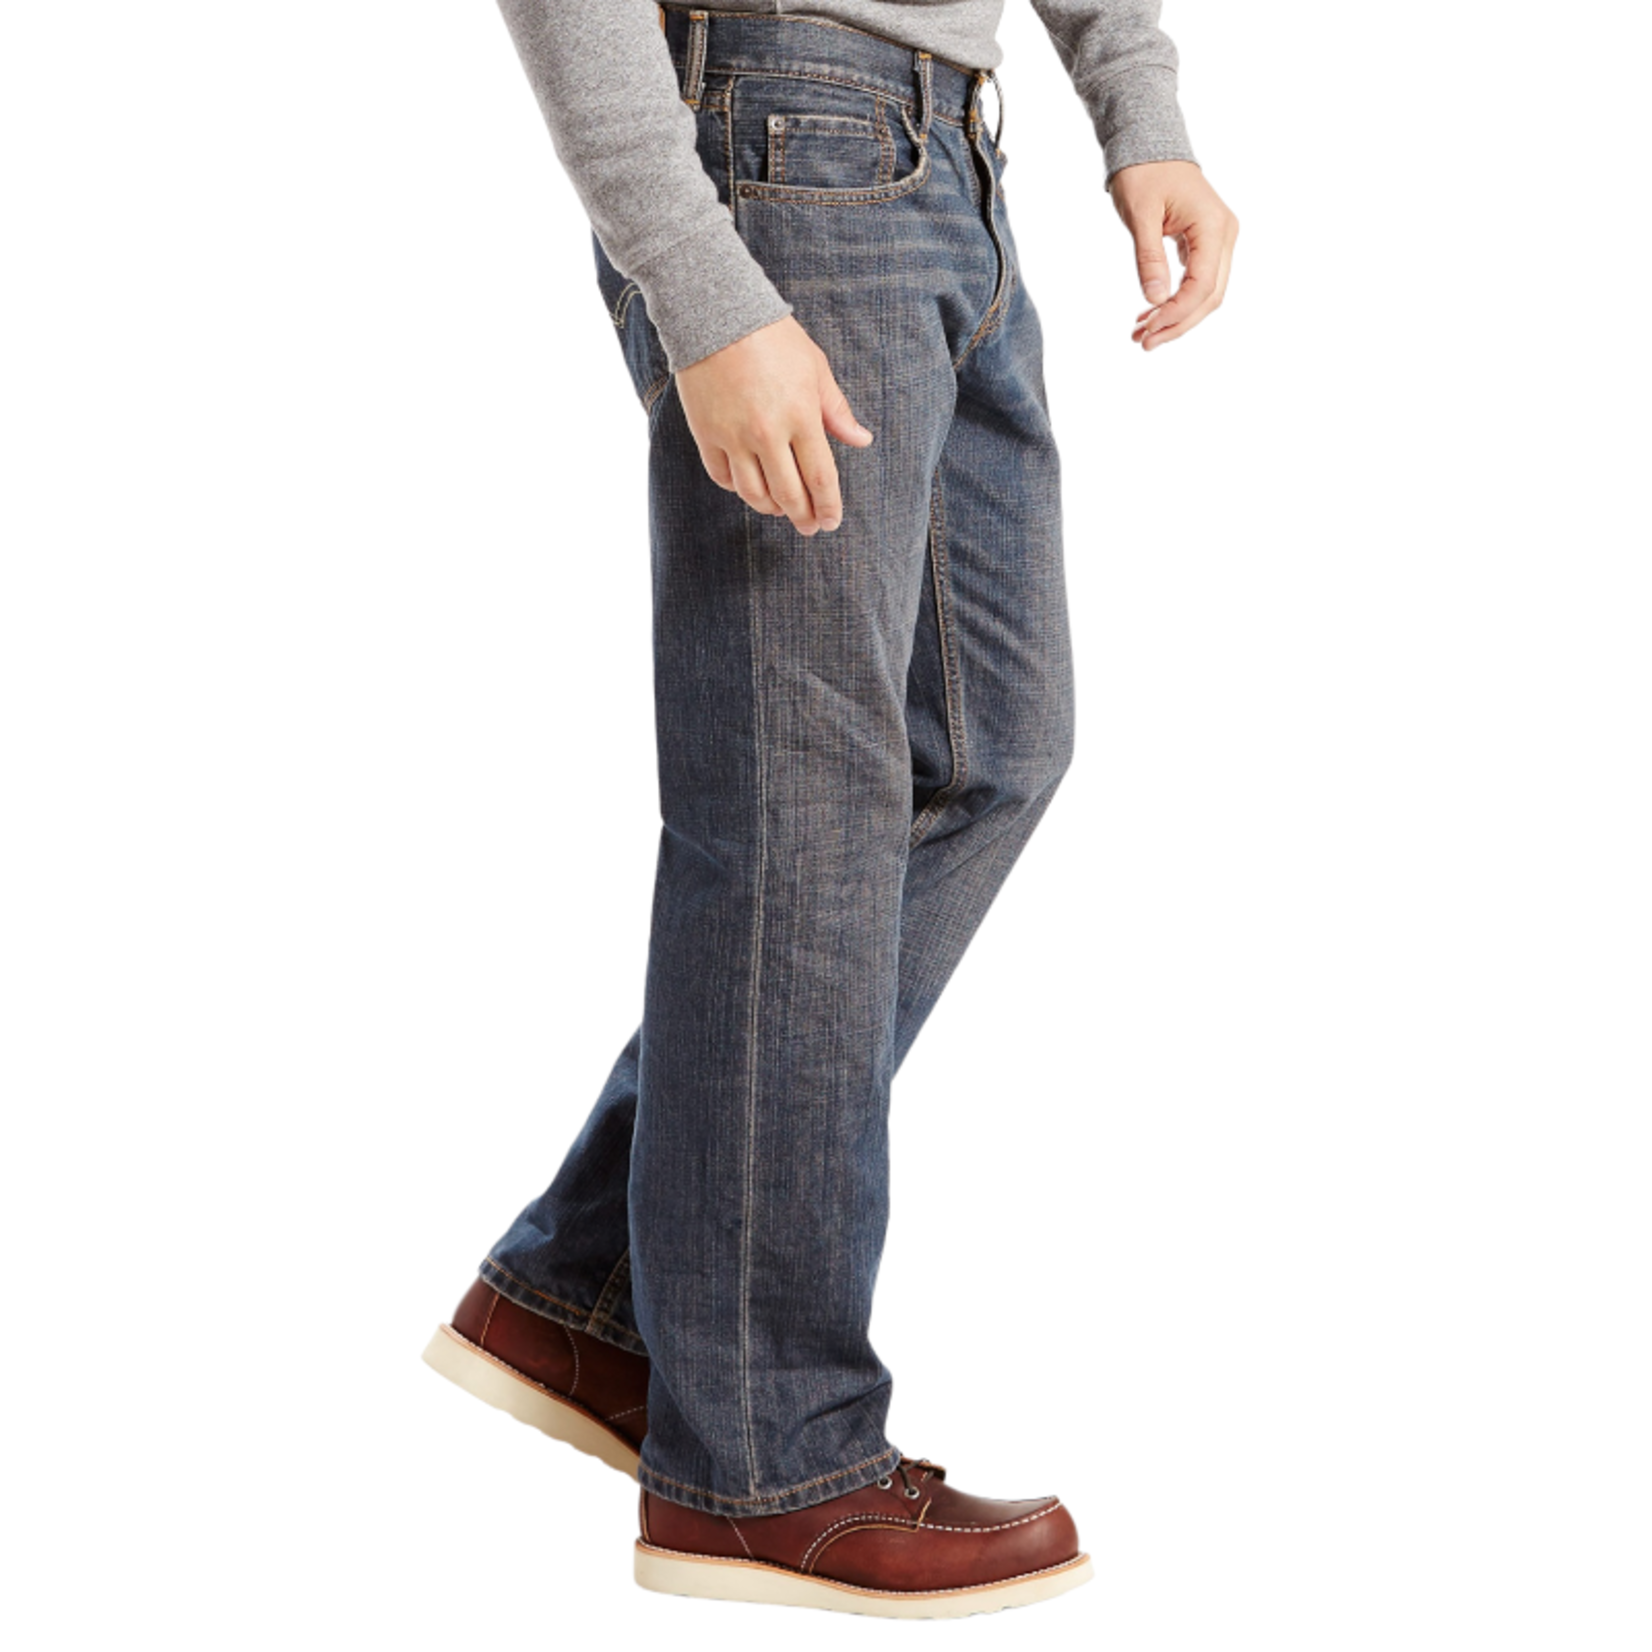 LEVI'S 559 RELAXED STRAIGHT FIT JEAN 00559-2765 - Michael's and Jody's